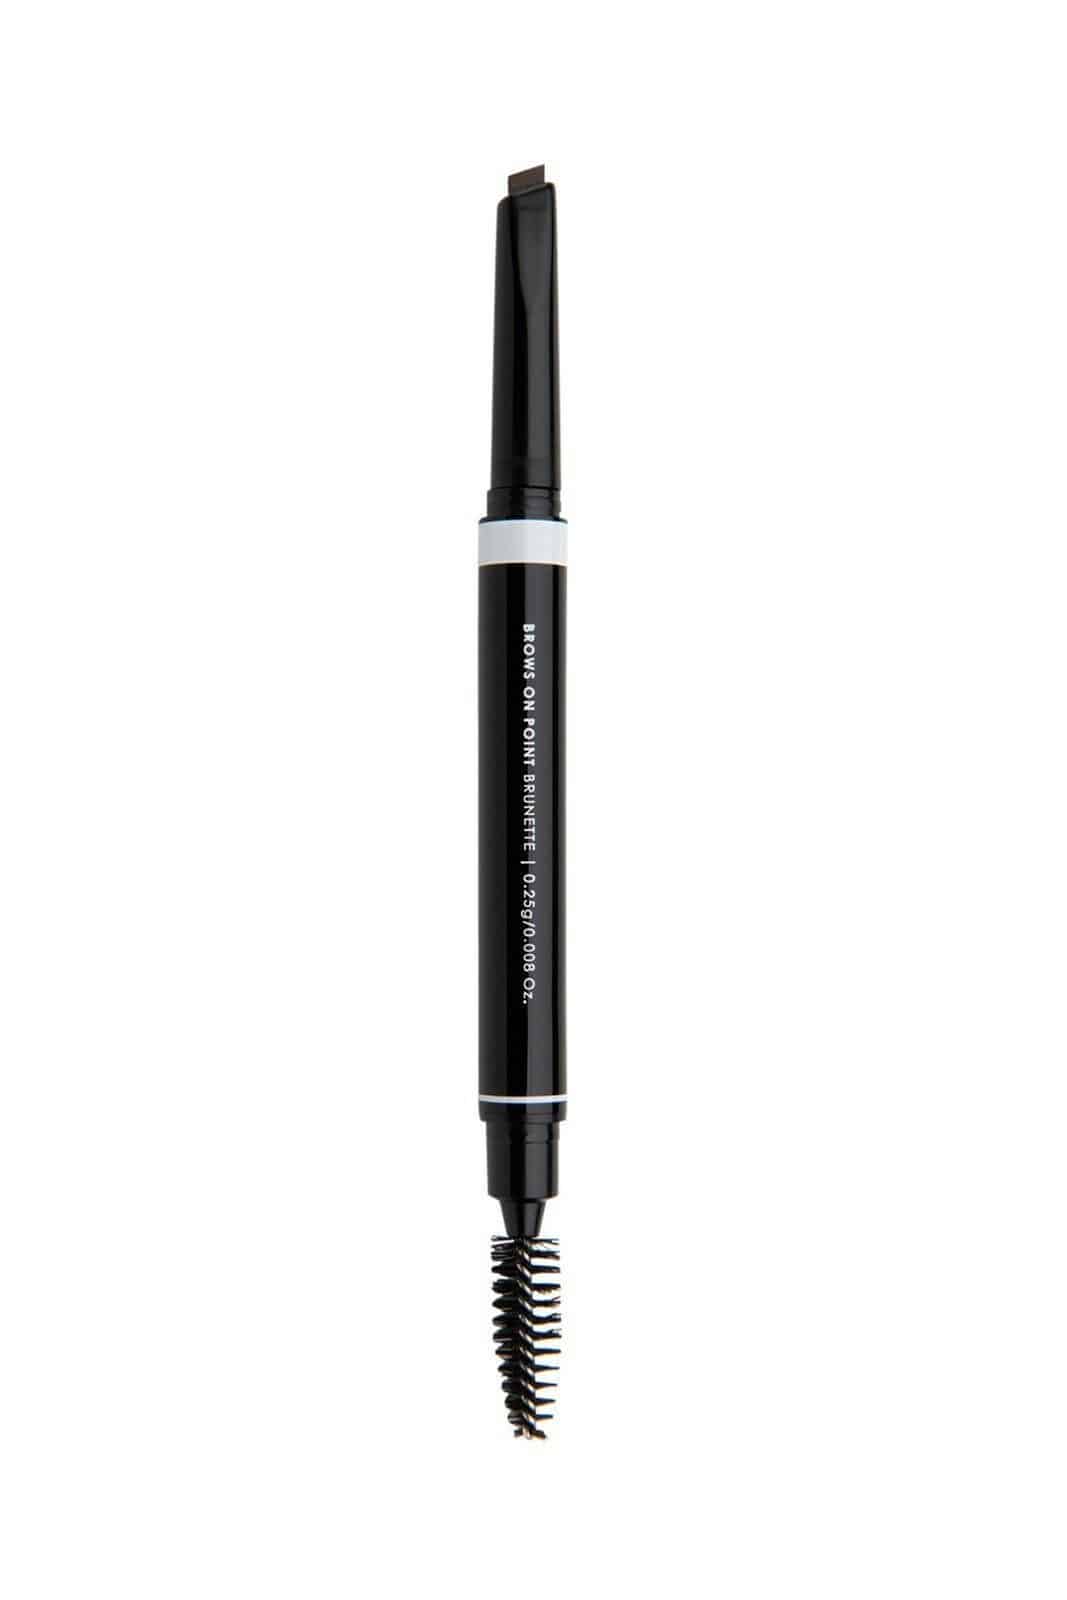 Garbo & Kelly Brunette - Brows on Point x 1  Brow Pencil Garbo & Kelly - On Line Hair Depot